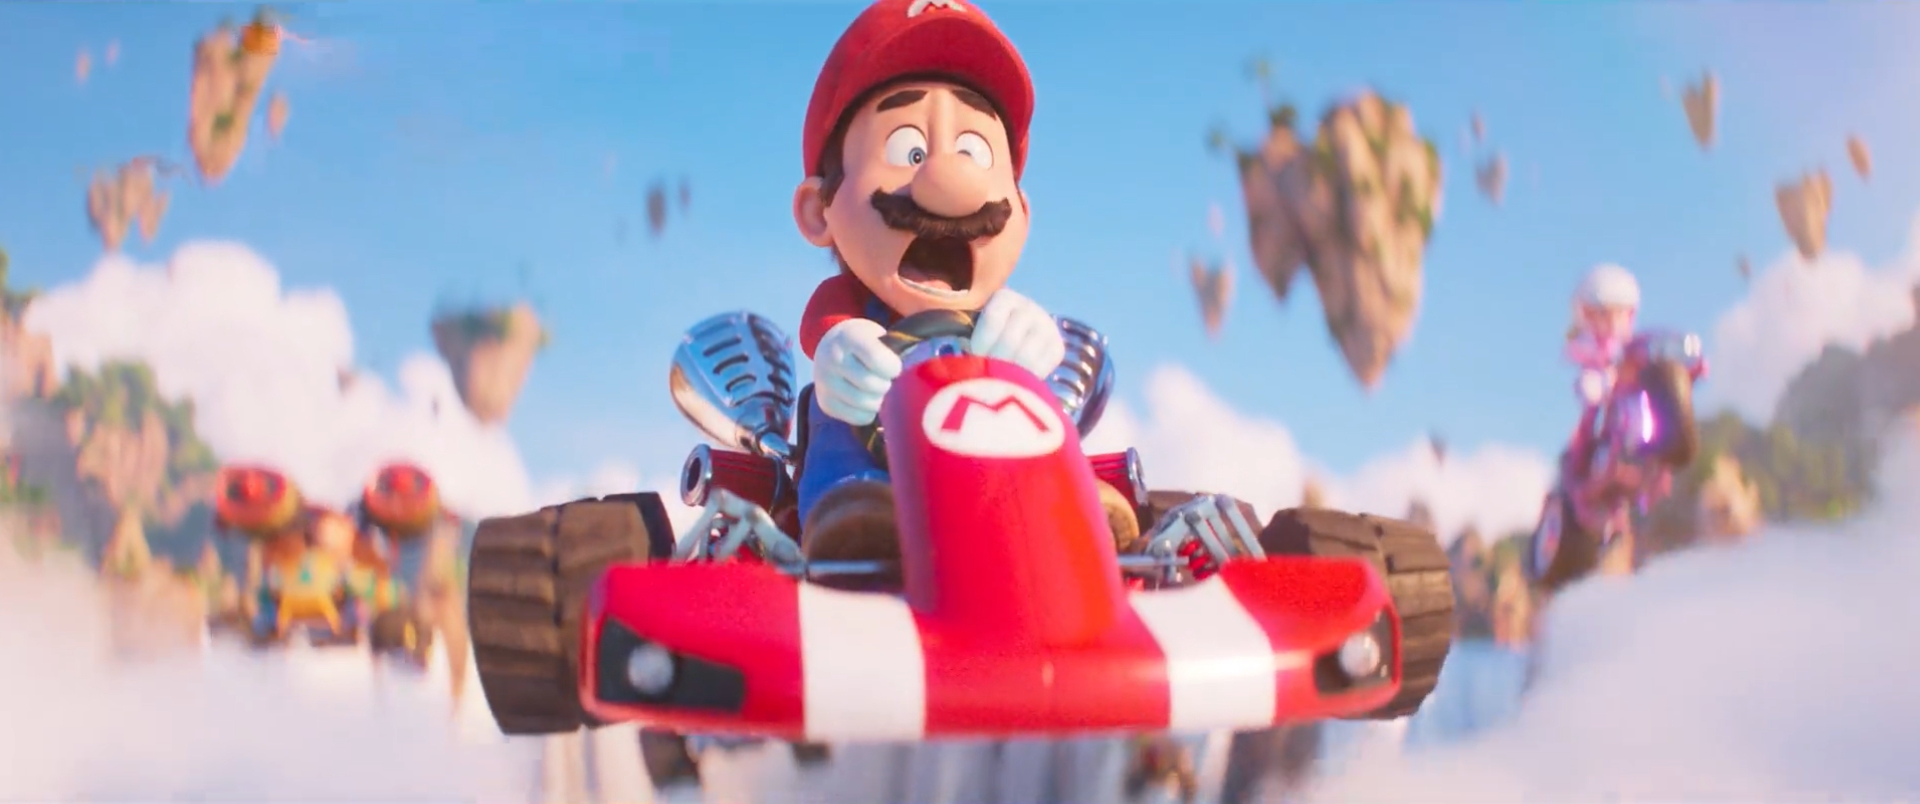 The rollout for the new Mario movie is already kind of a disaster and it's  all Chris Pratt's fault - Queerty